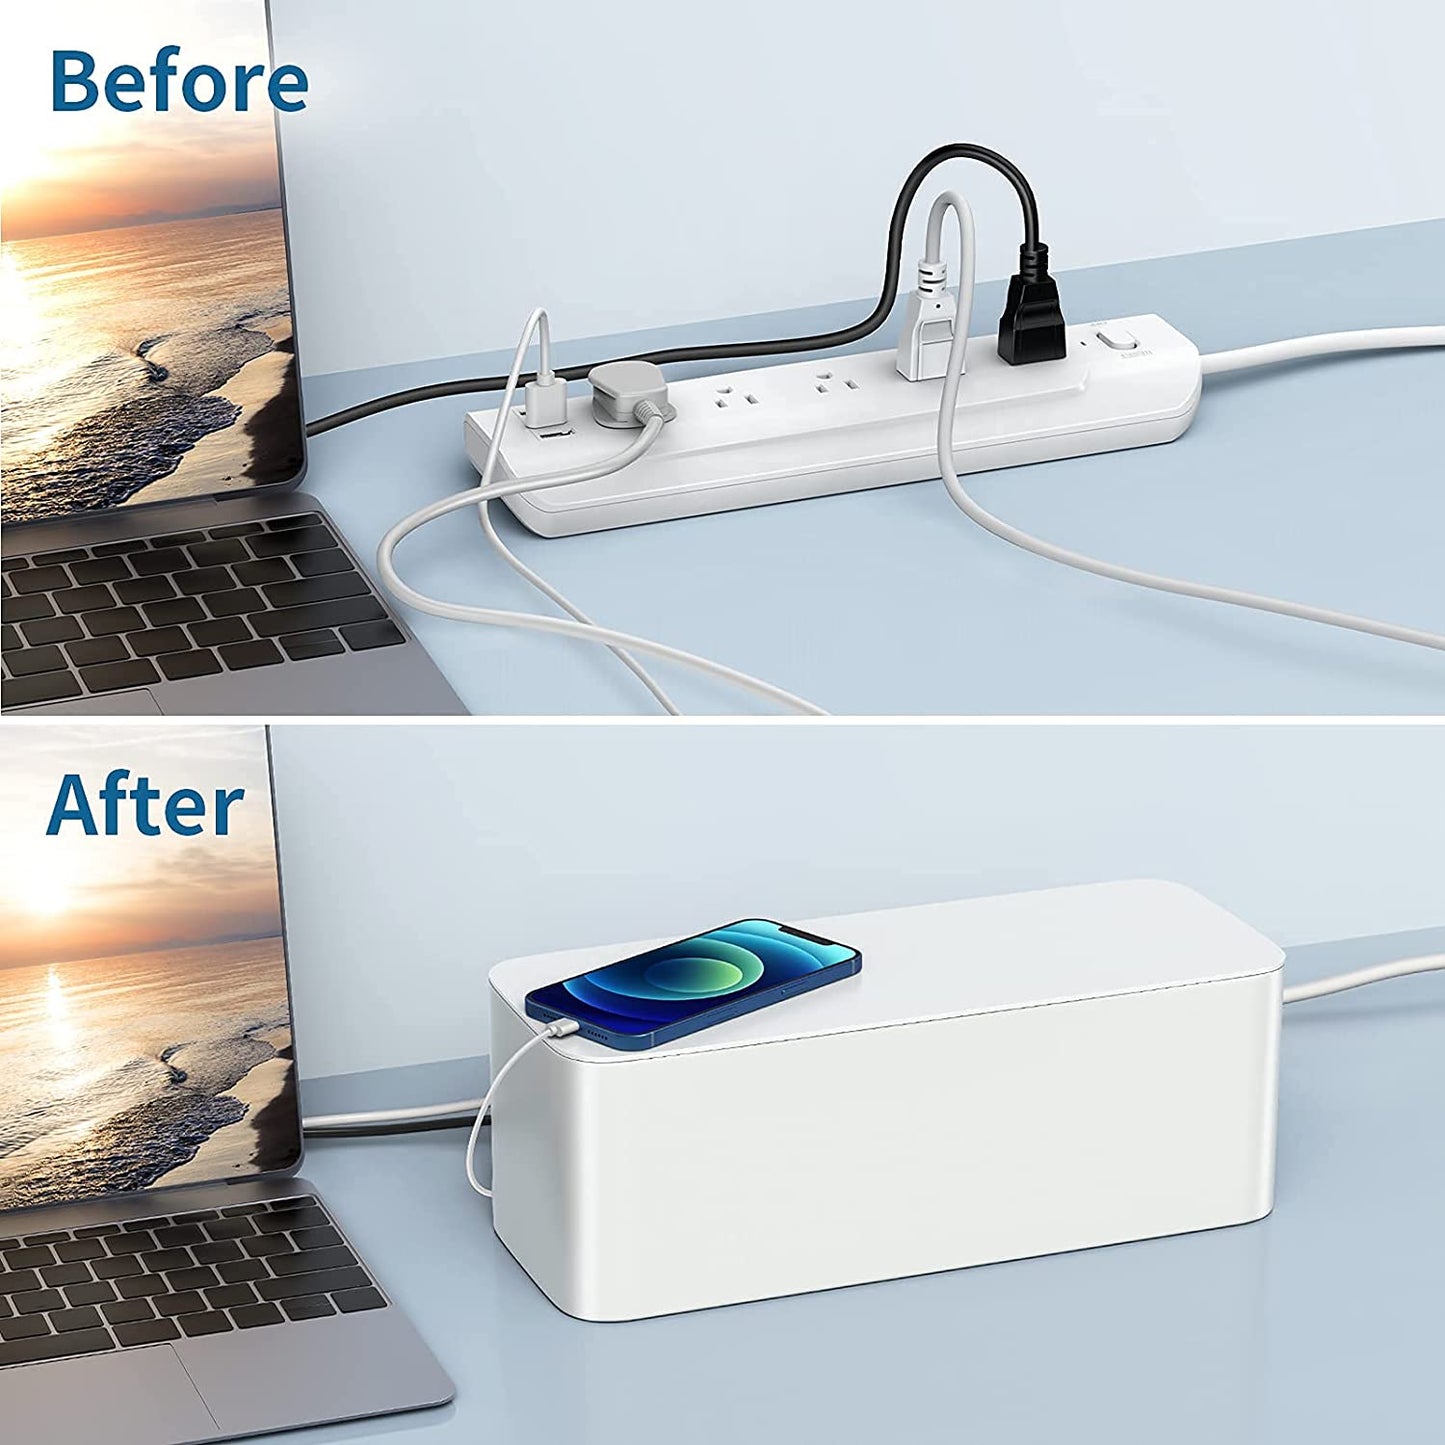 Cord Organizer Cable Management Box Cover For USB USB Hub, TV Wires, Power Strips Proof Lock-White - 2 Pack